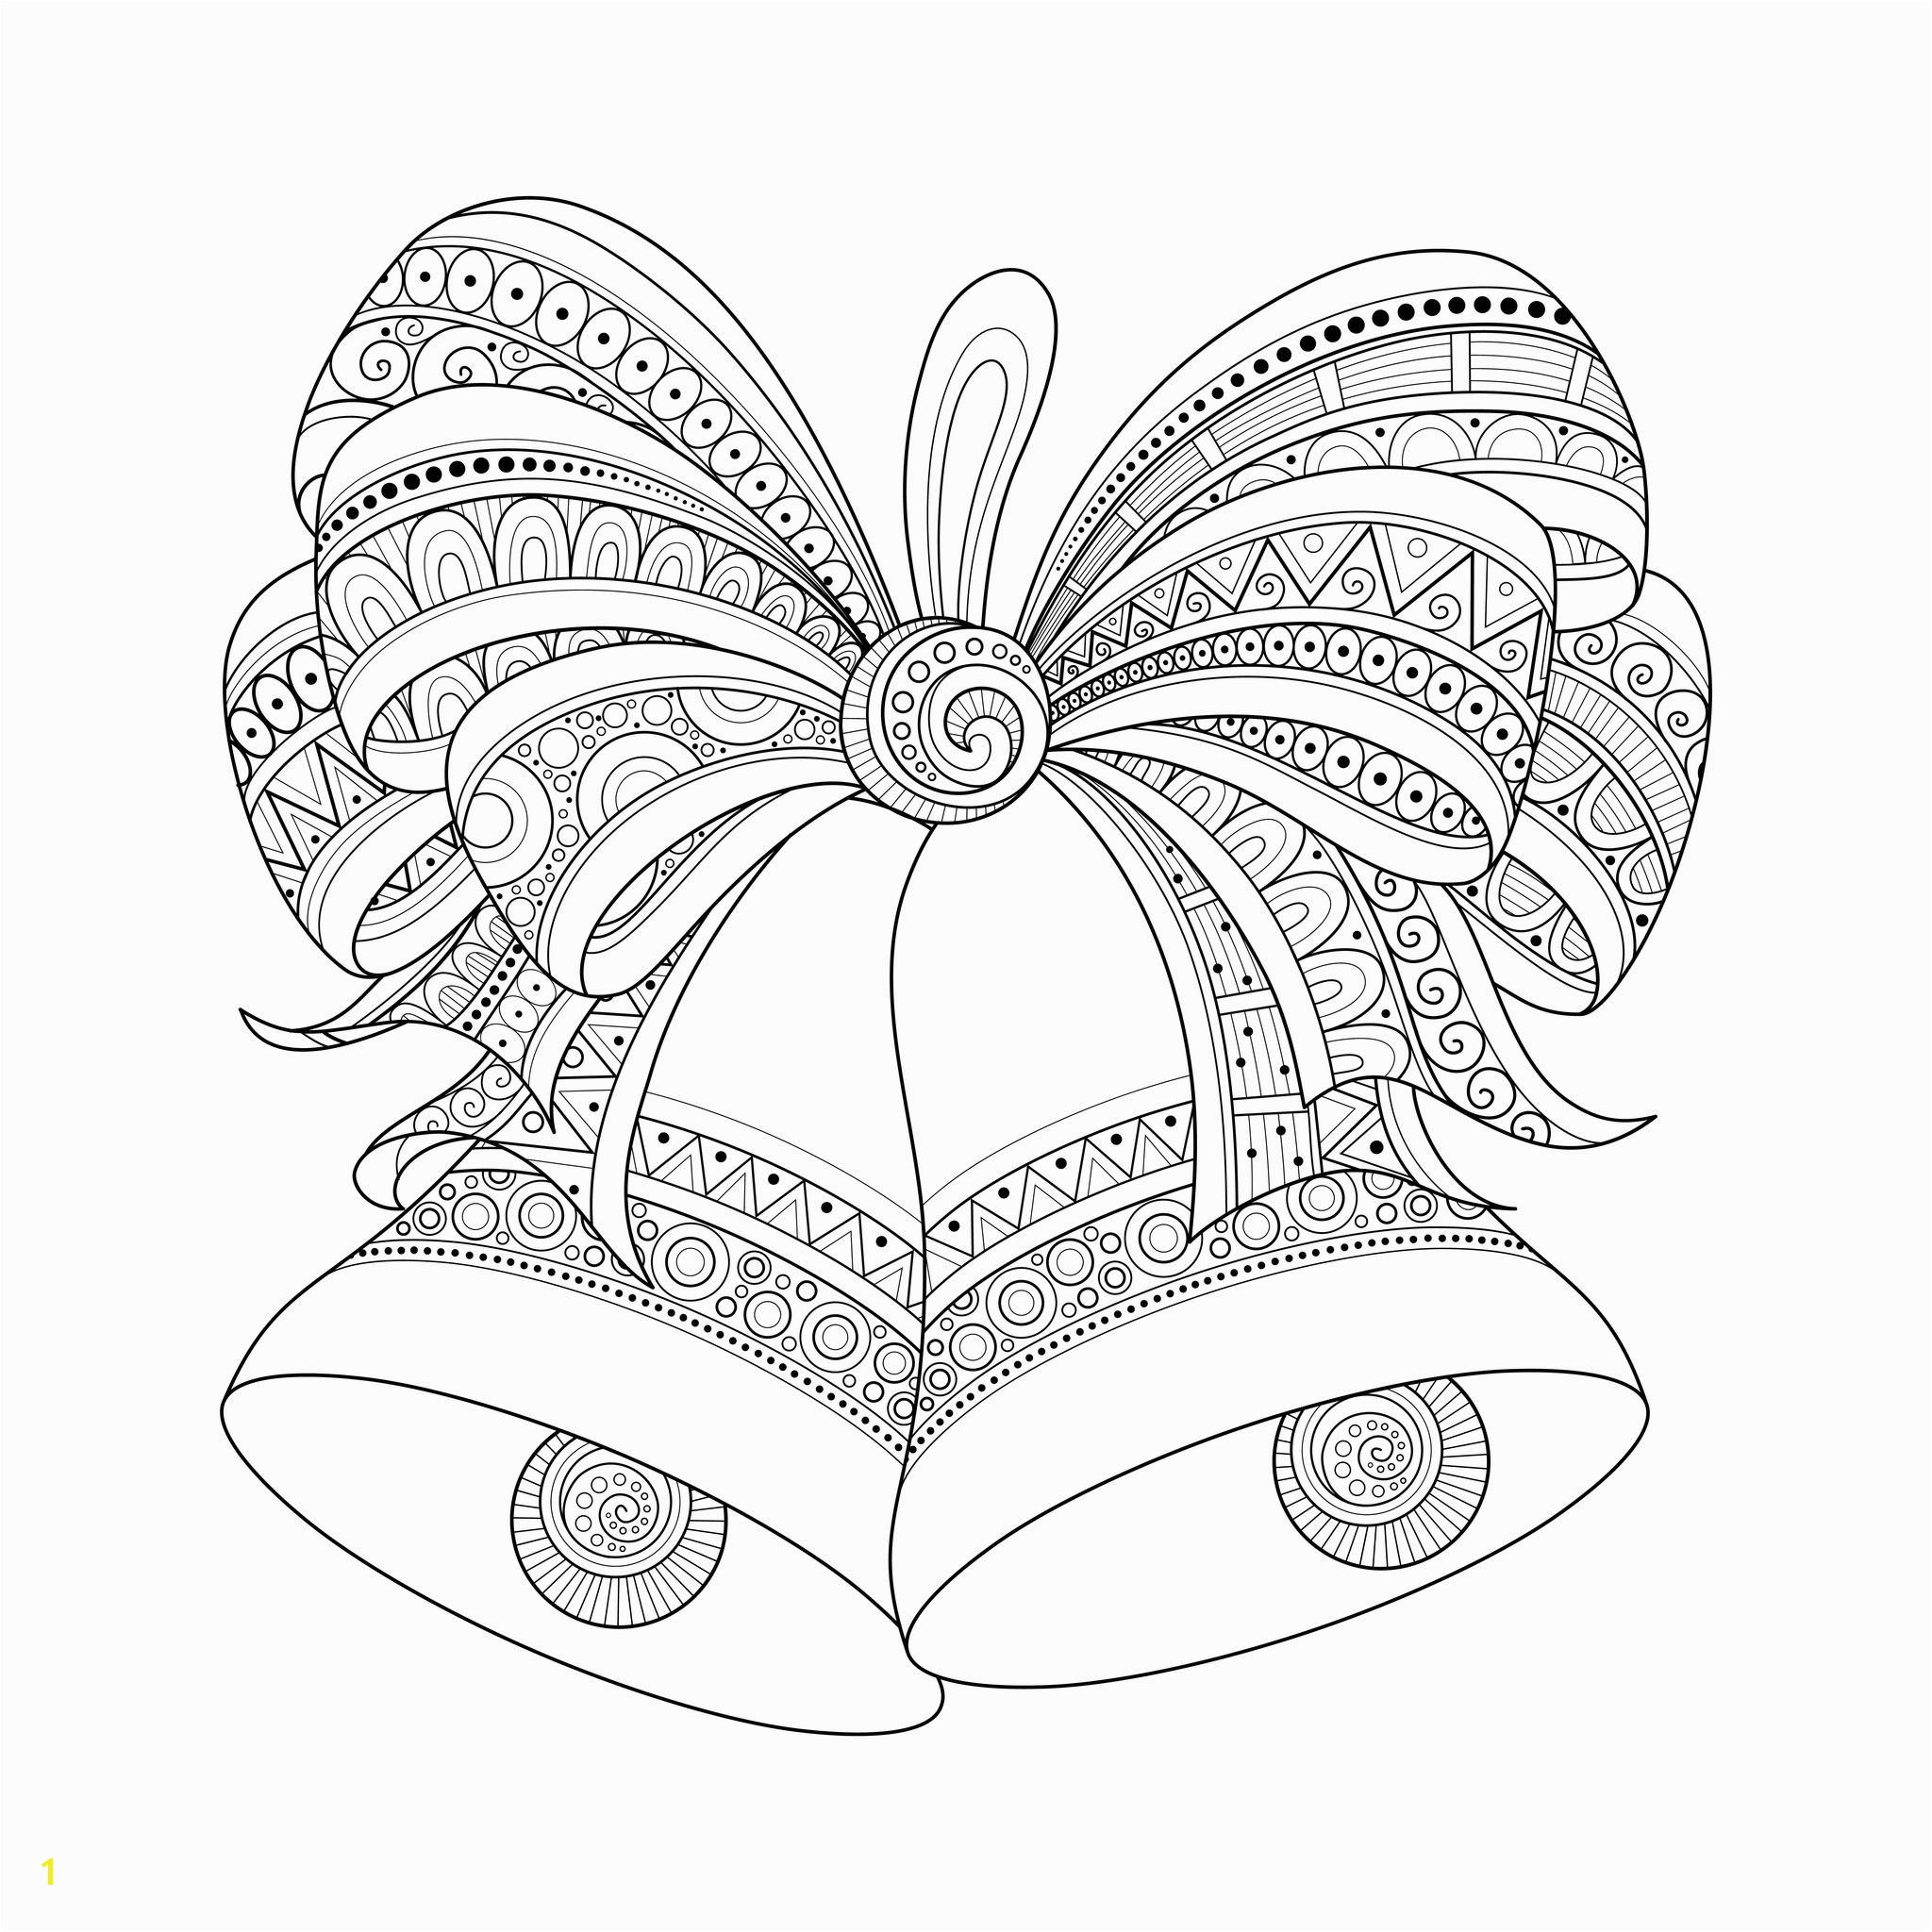 Christmas Printable Coloring Pages for Adults Christmas Coloring Pages for Adults